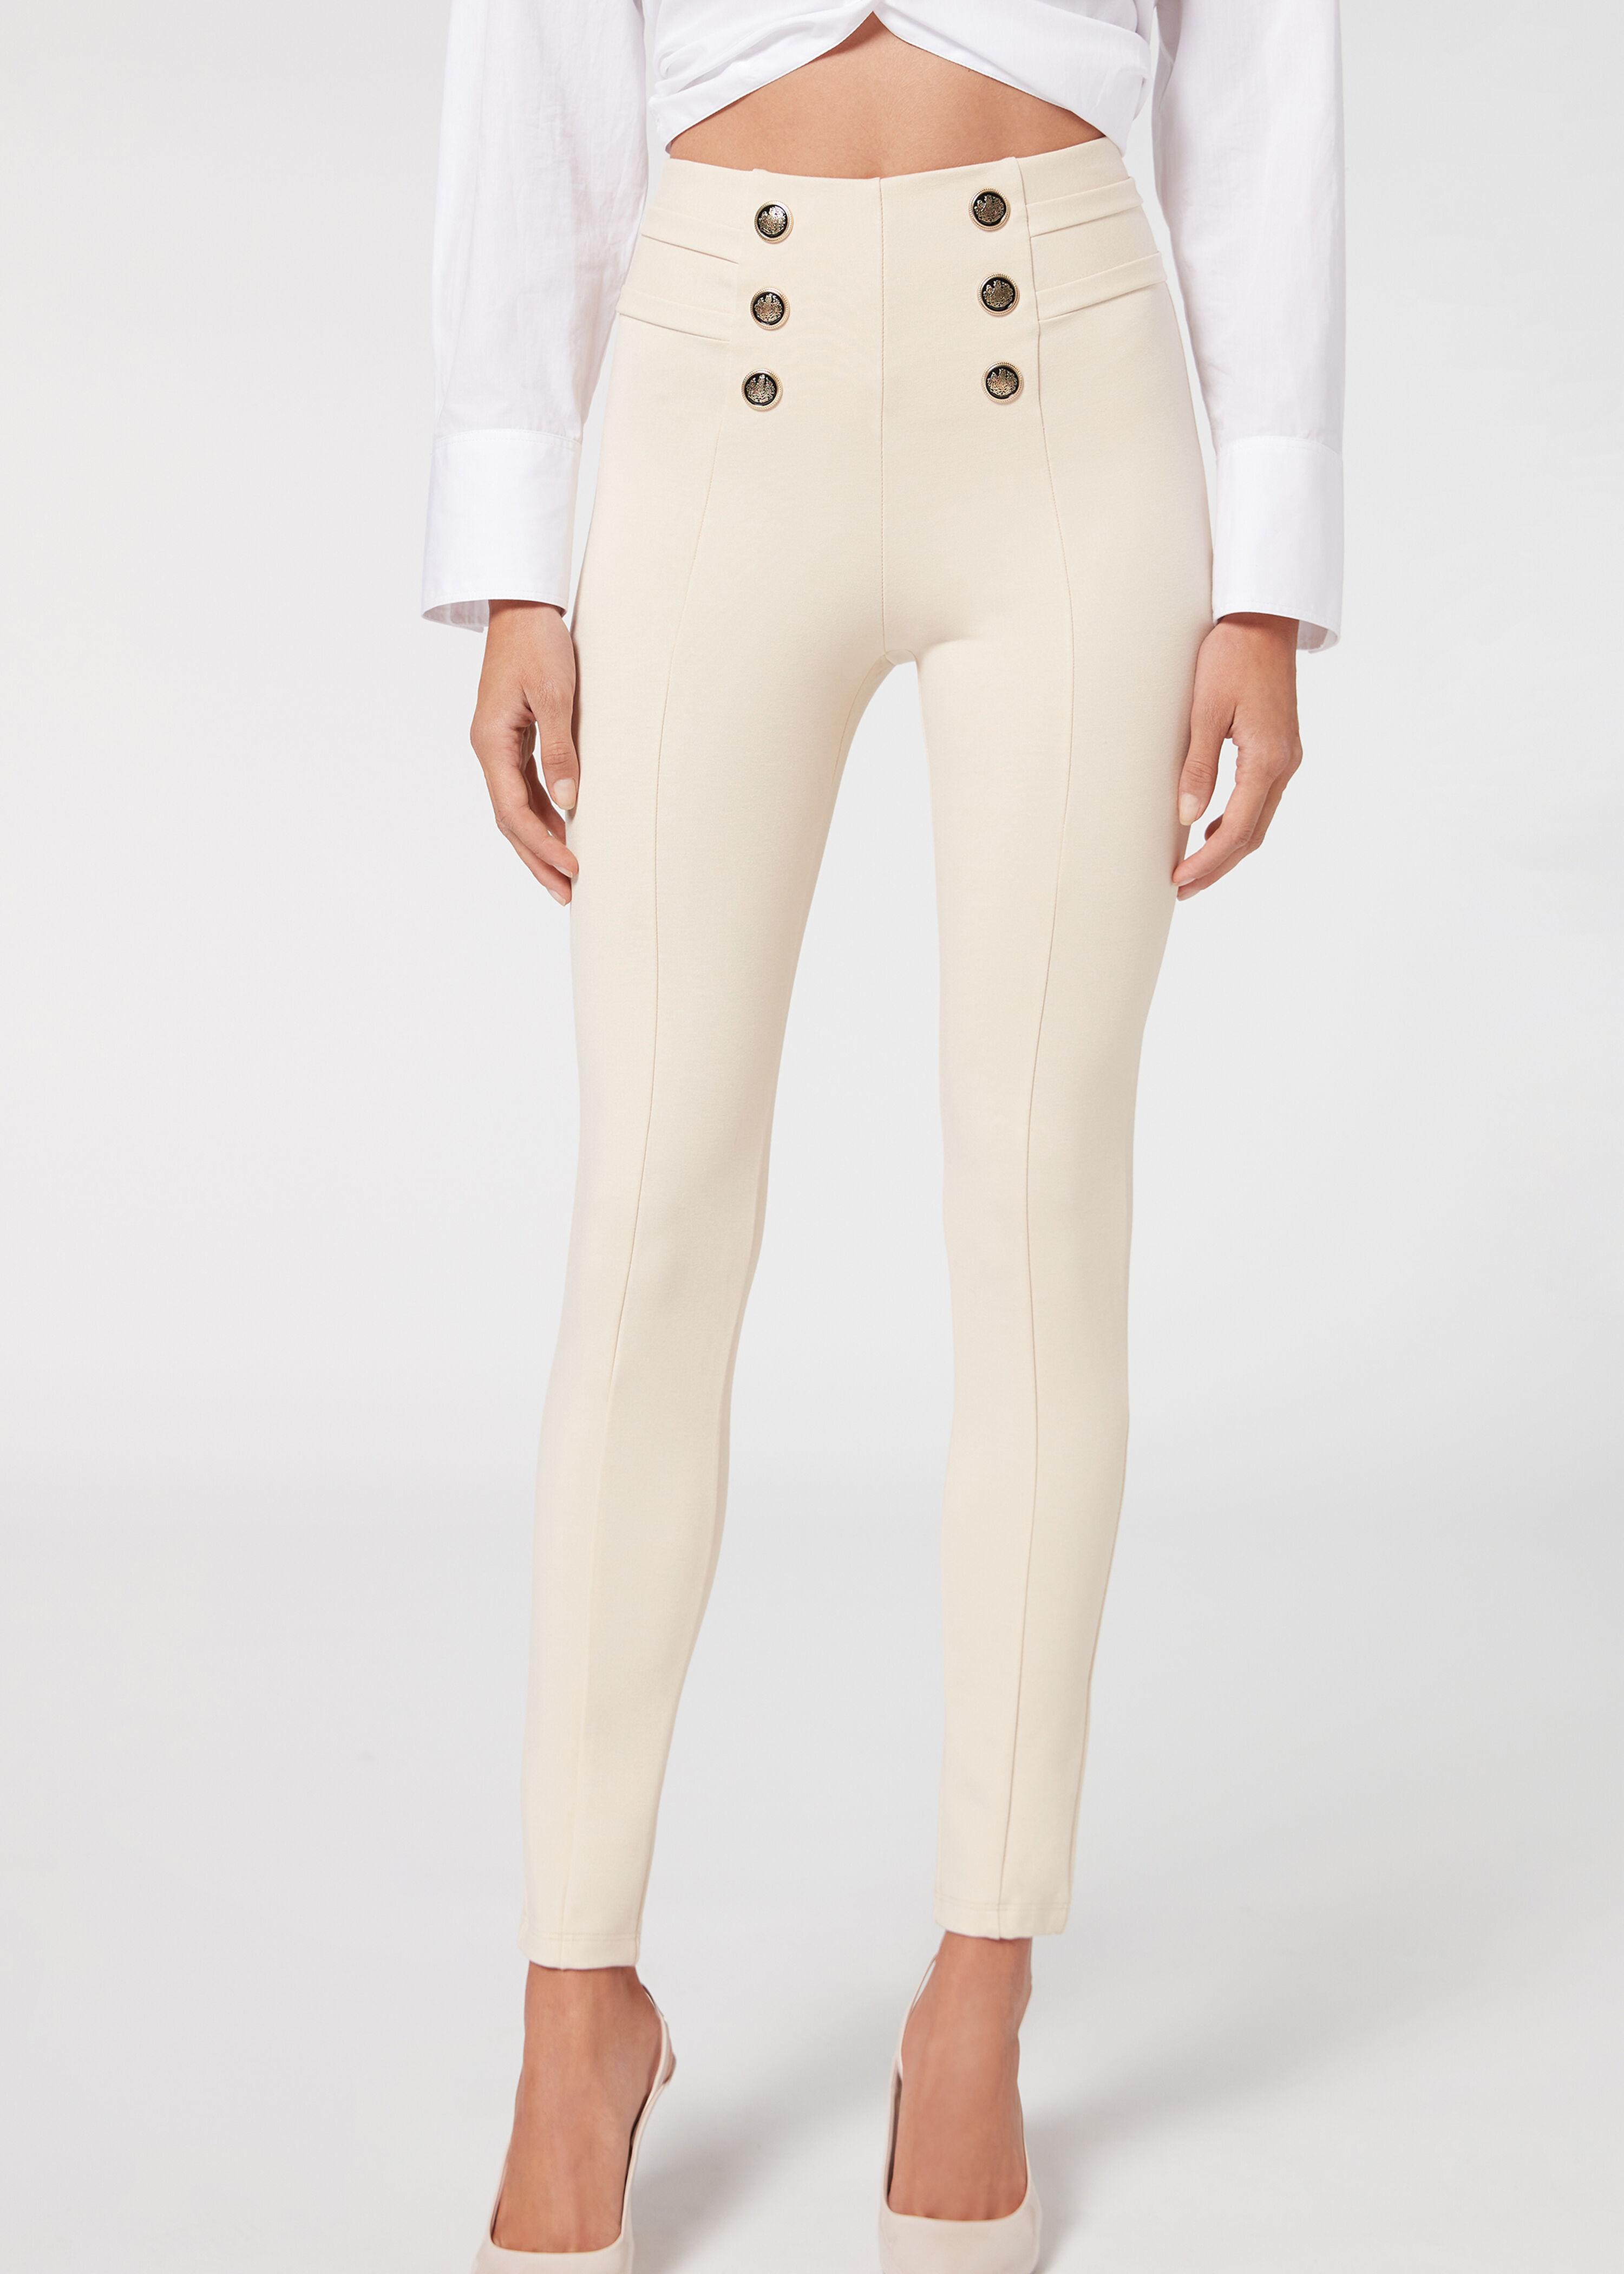 Calzedonia Skinny Shaping leggings With Buttons in Natural | Lyst UK